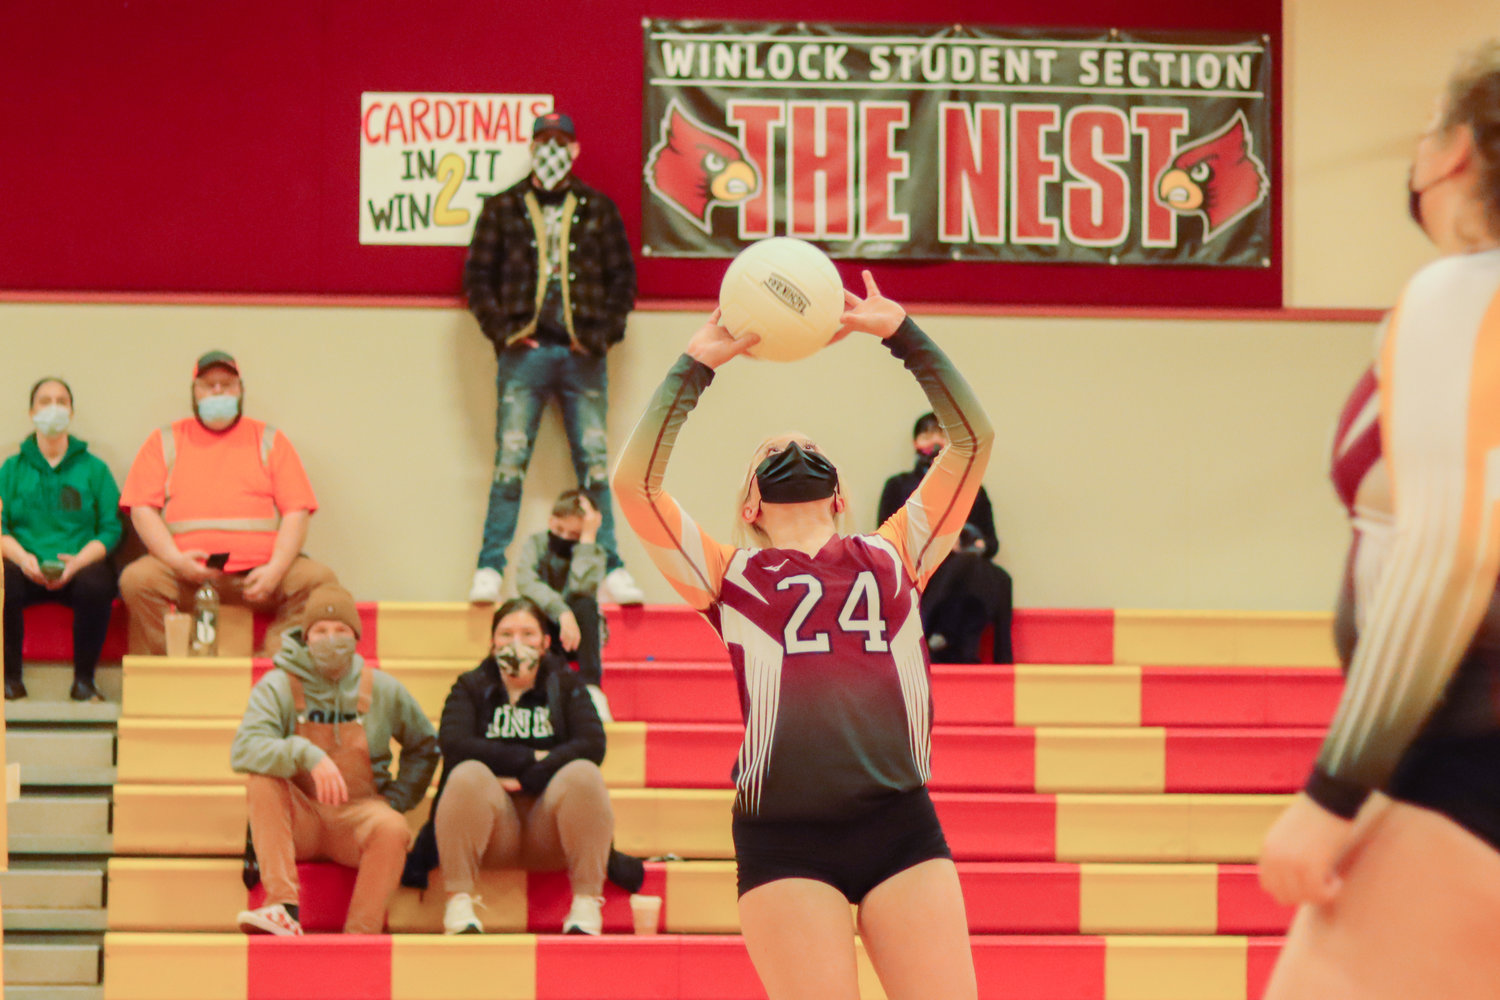 Cardinal's Kaitlynn Mitchell (24) sets the ball during a volleyball game in Winlock on Tuesday.